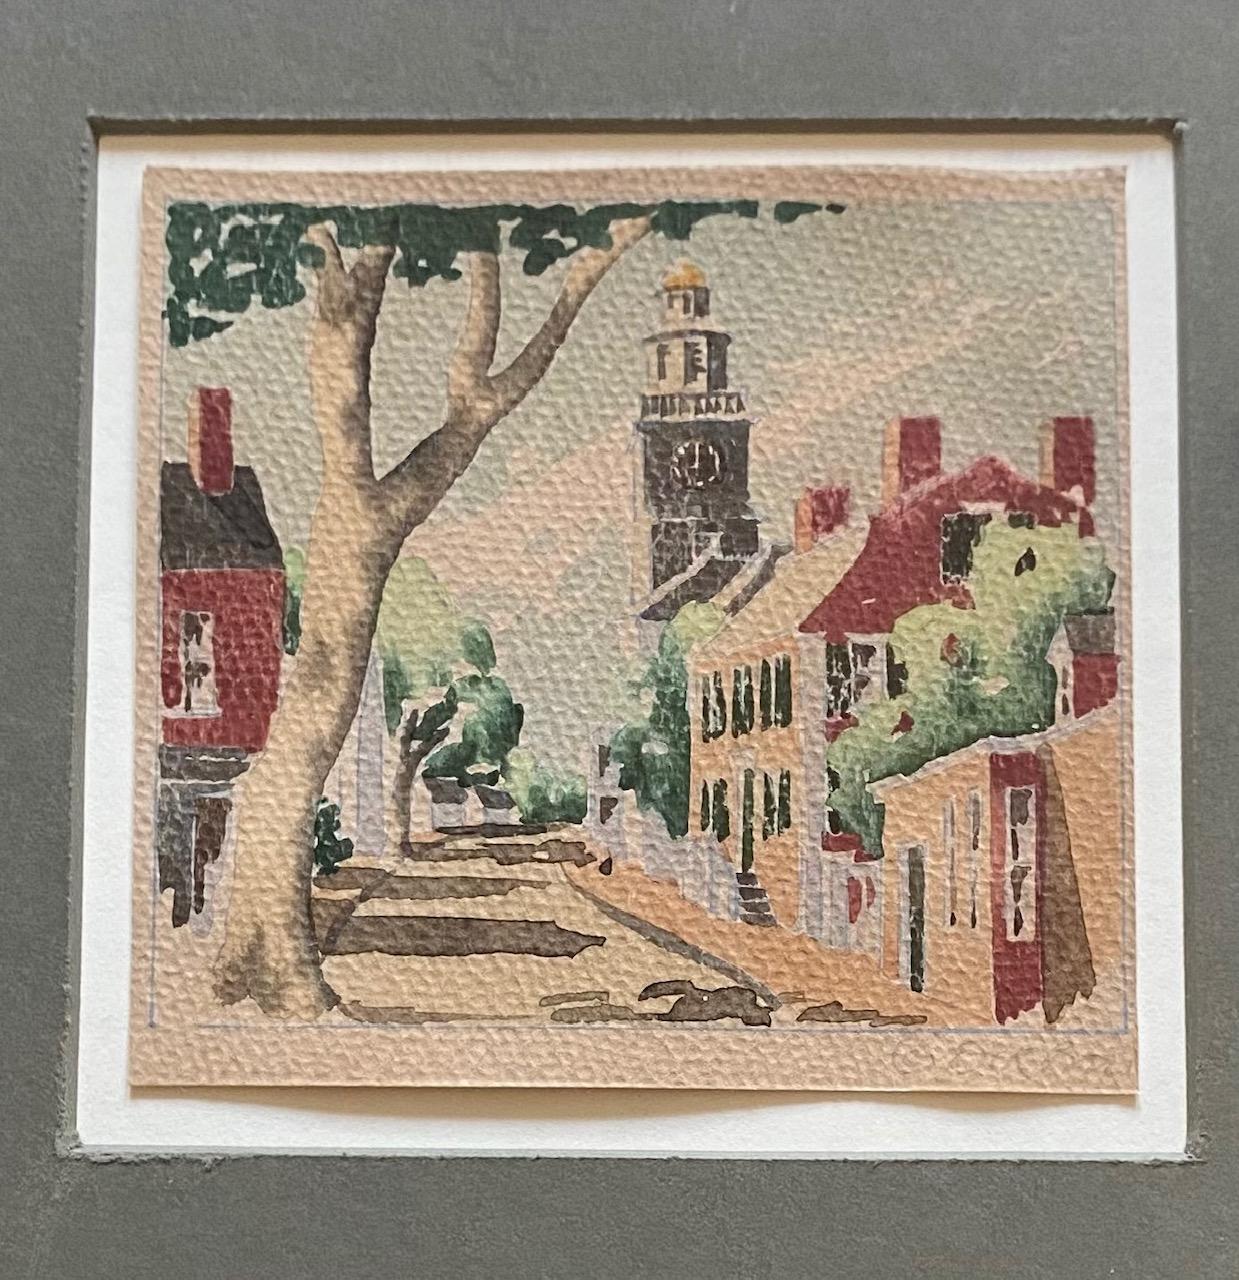 Vintage Nantucket orange street watercolor by Doris & Richard Beer, circa 1940, a watercolor on paper view of orange street, signed in pencil power right. Doris and Richard Beer (1898-1967 and 1893-1959 respectively) produced a well-known series of